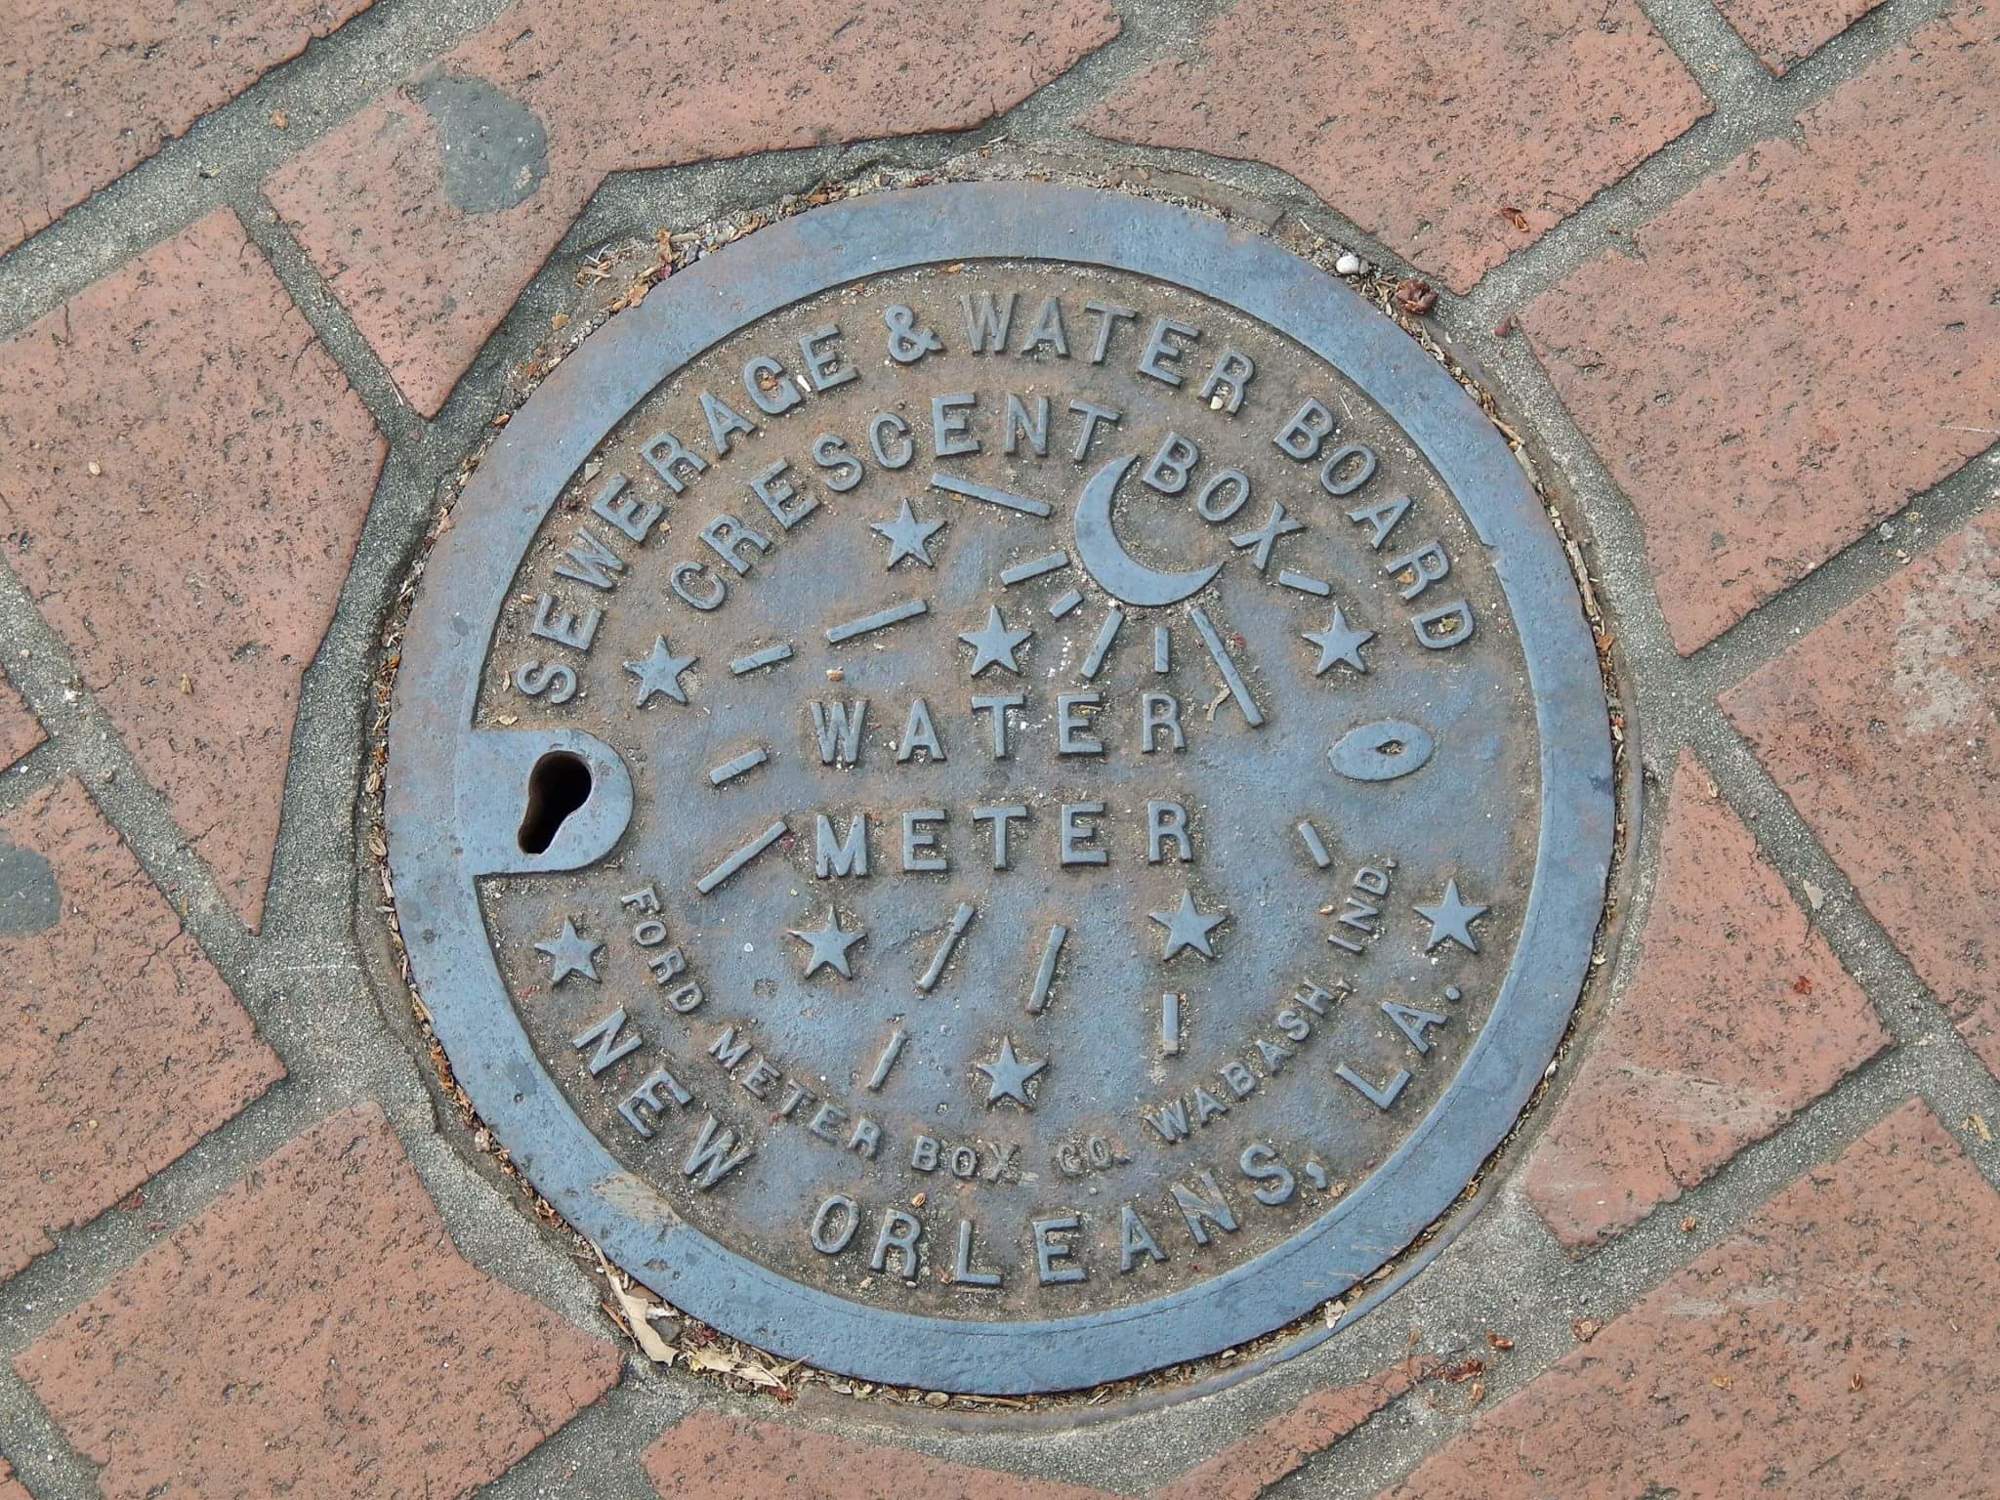 Courtesy. David Farmer has taken pictures of manhole covers across the world, such as this one in New Orleans.